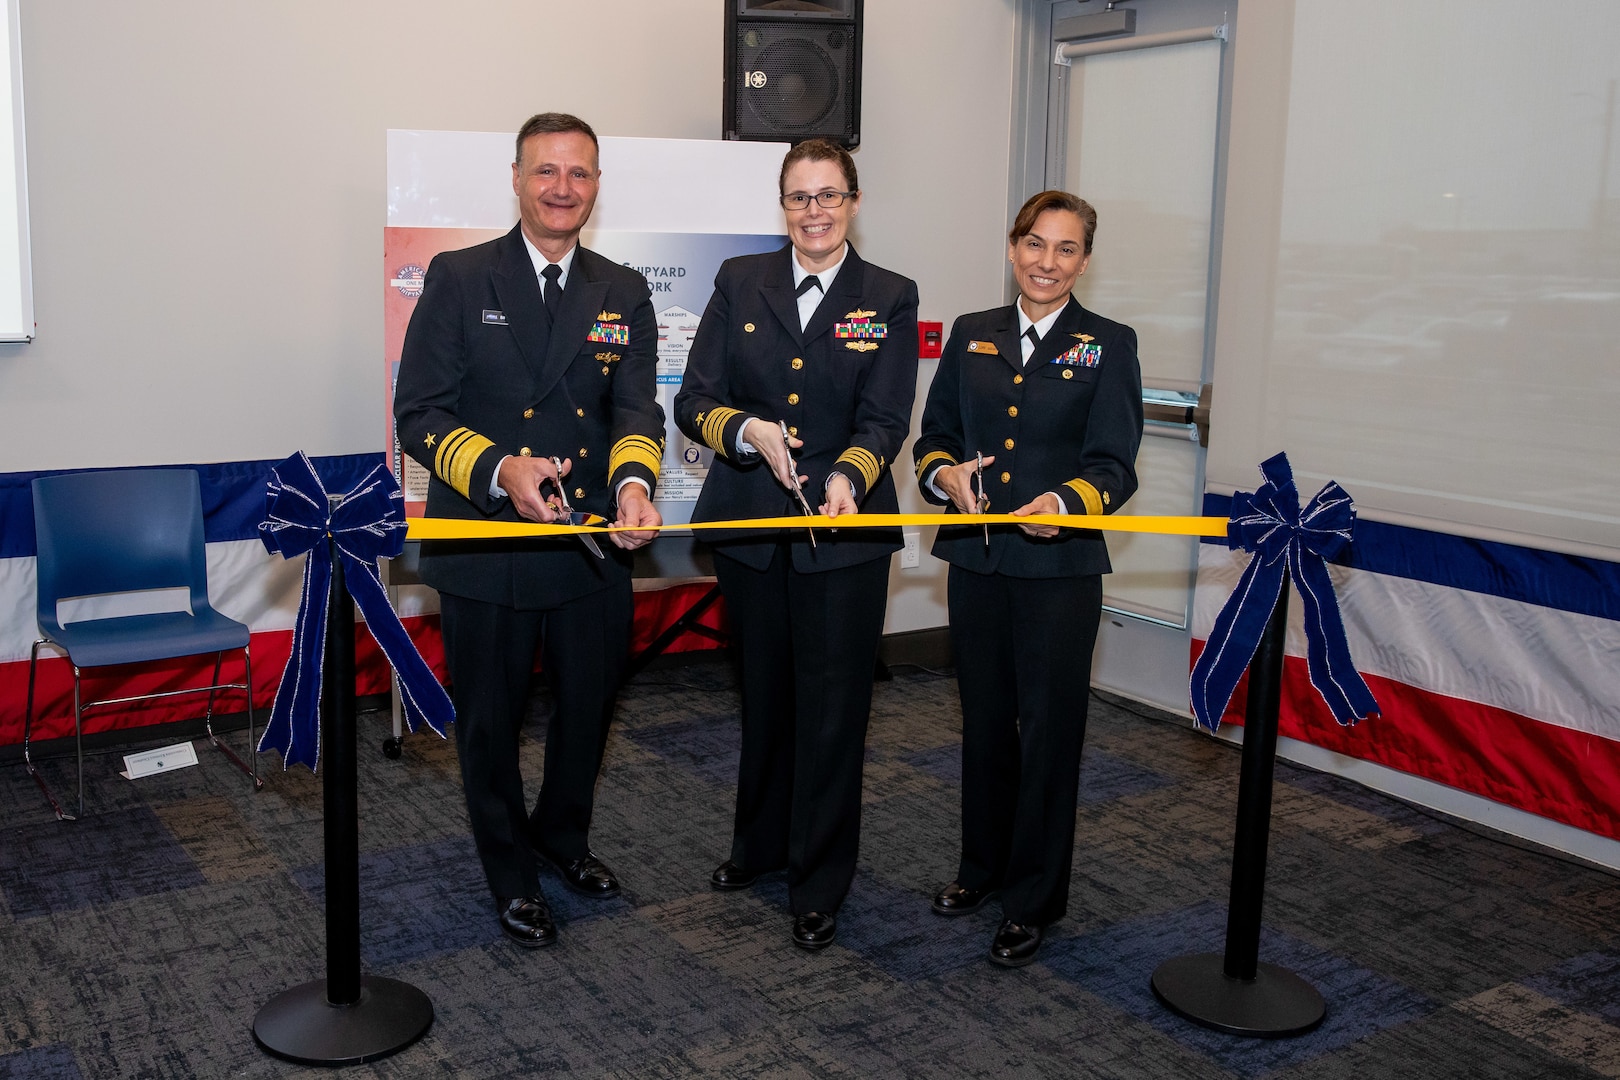 Vice Admiral William Galinis, Commander, Naval Sea Systems Command; Captain Dianna Wolfson, Norfolk Naval Shipyard Commander; and Rear Admiral Maria “Lore” Aguayo, Commander, Naval Facilities Engineering Systems Command Atlantic, cut the ribbon for Norfolk Naval Shipyard’s new Production Training Facility Nov. 30